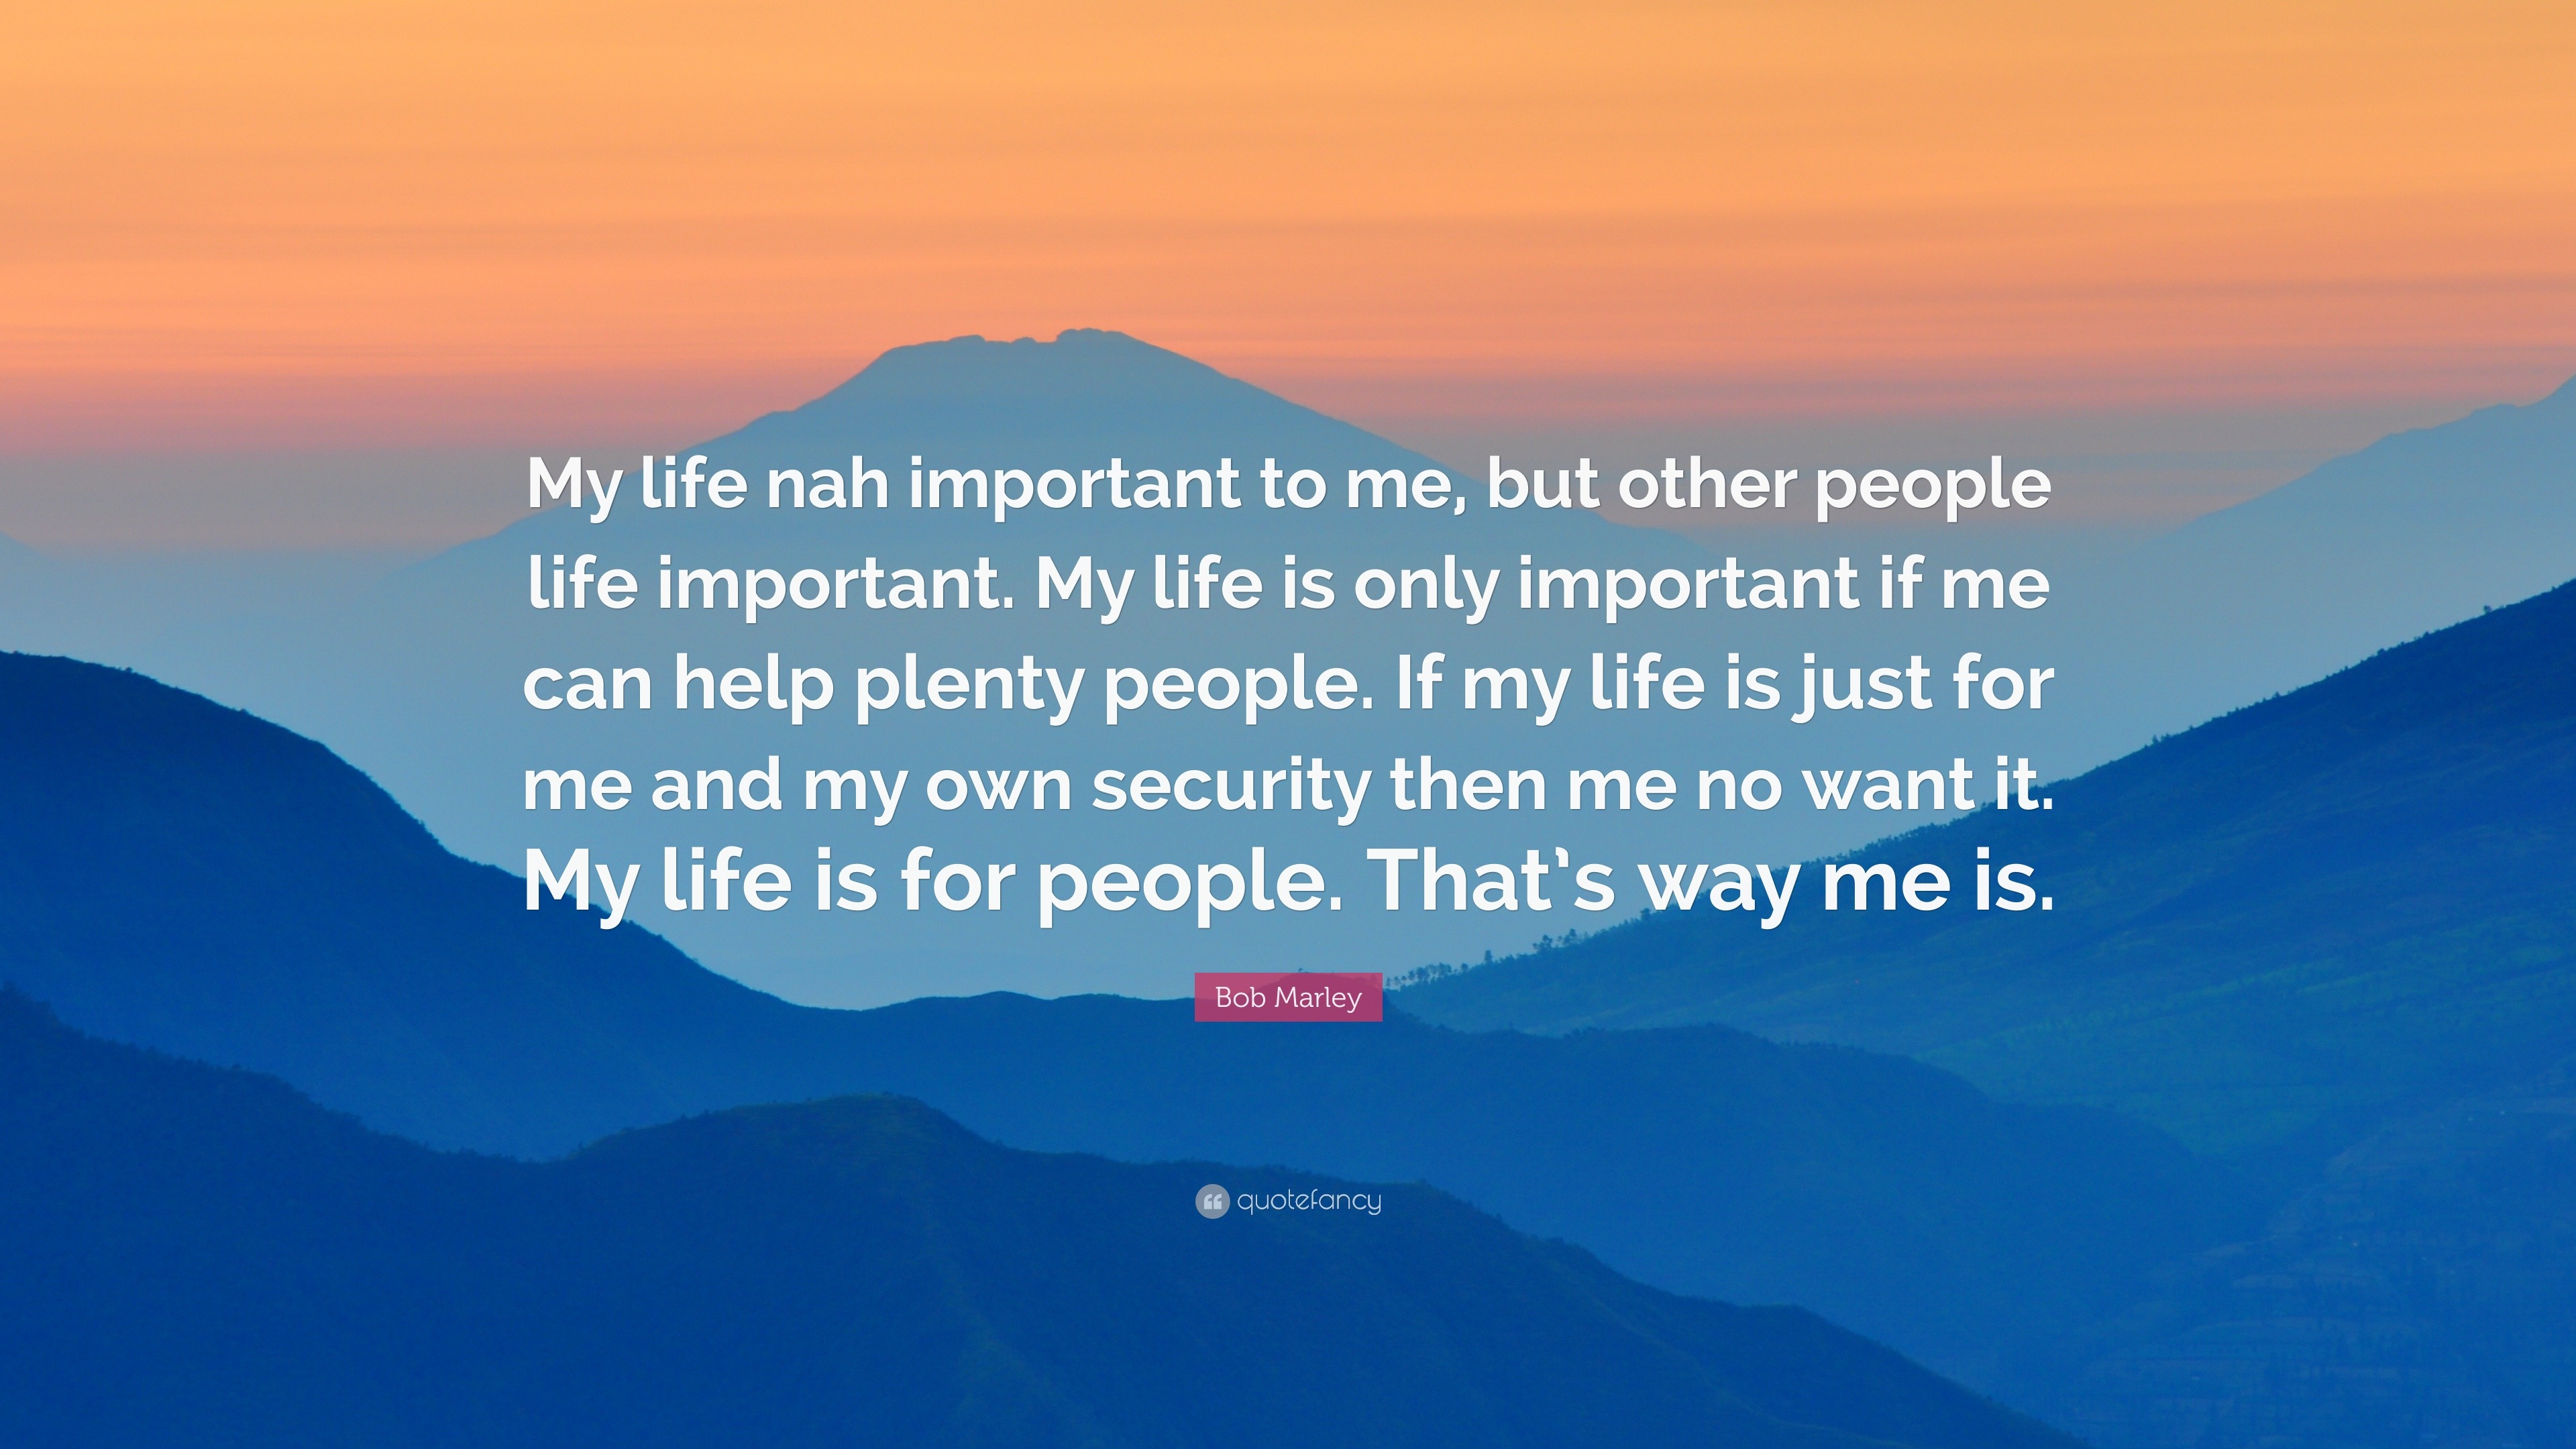 Bob Marley Quote “My life nah important to me but other people life